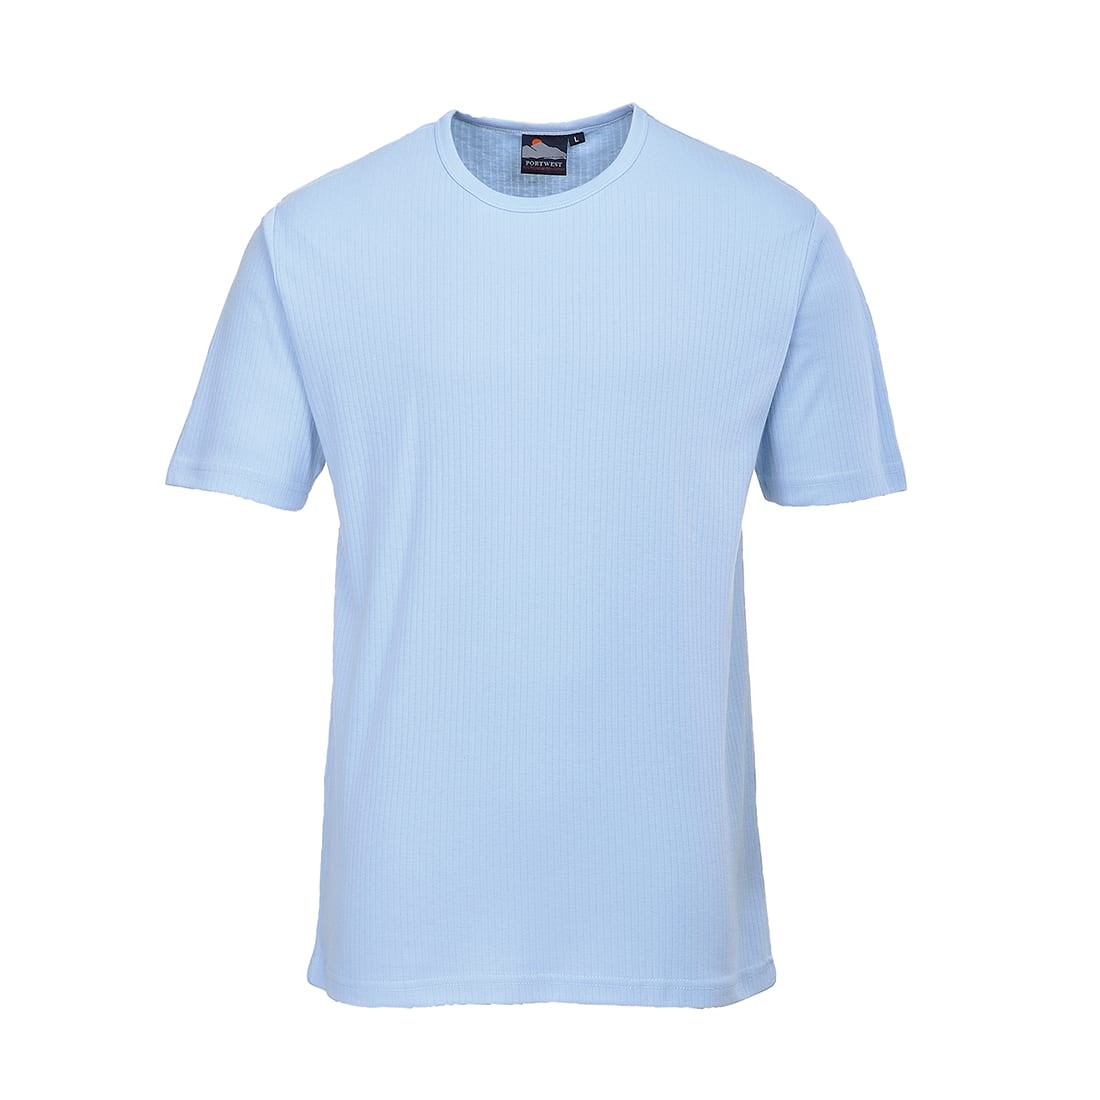 Portwest Thermal T-Shirt S/S